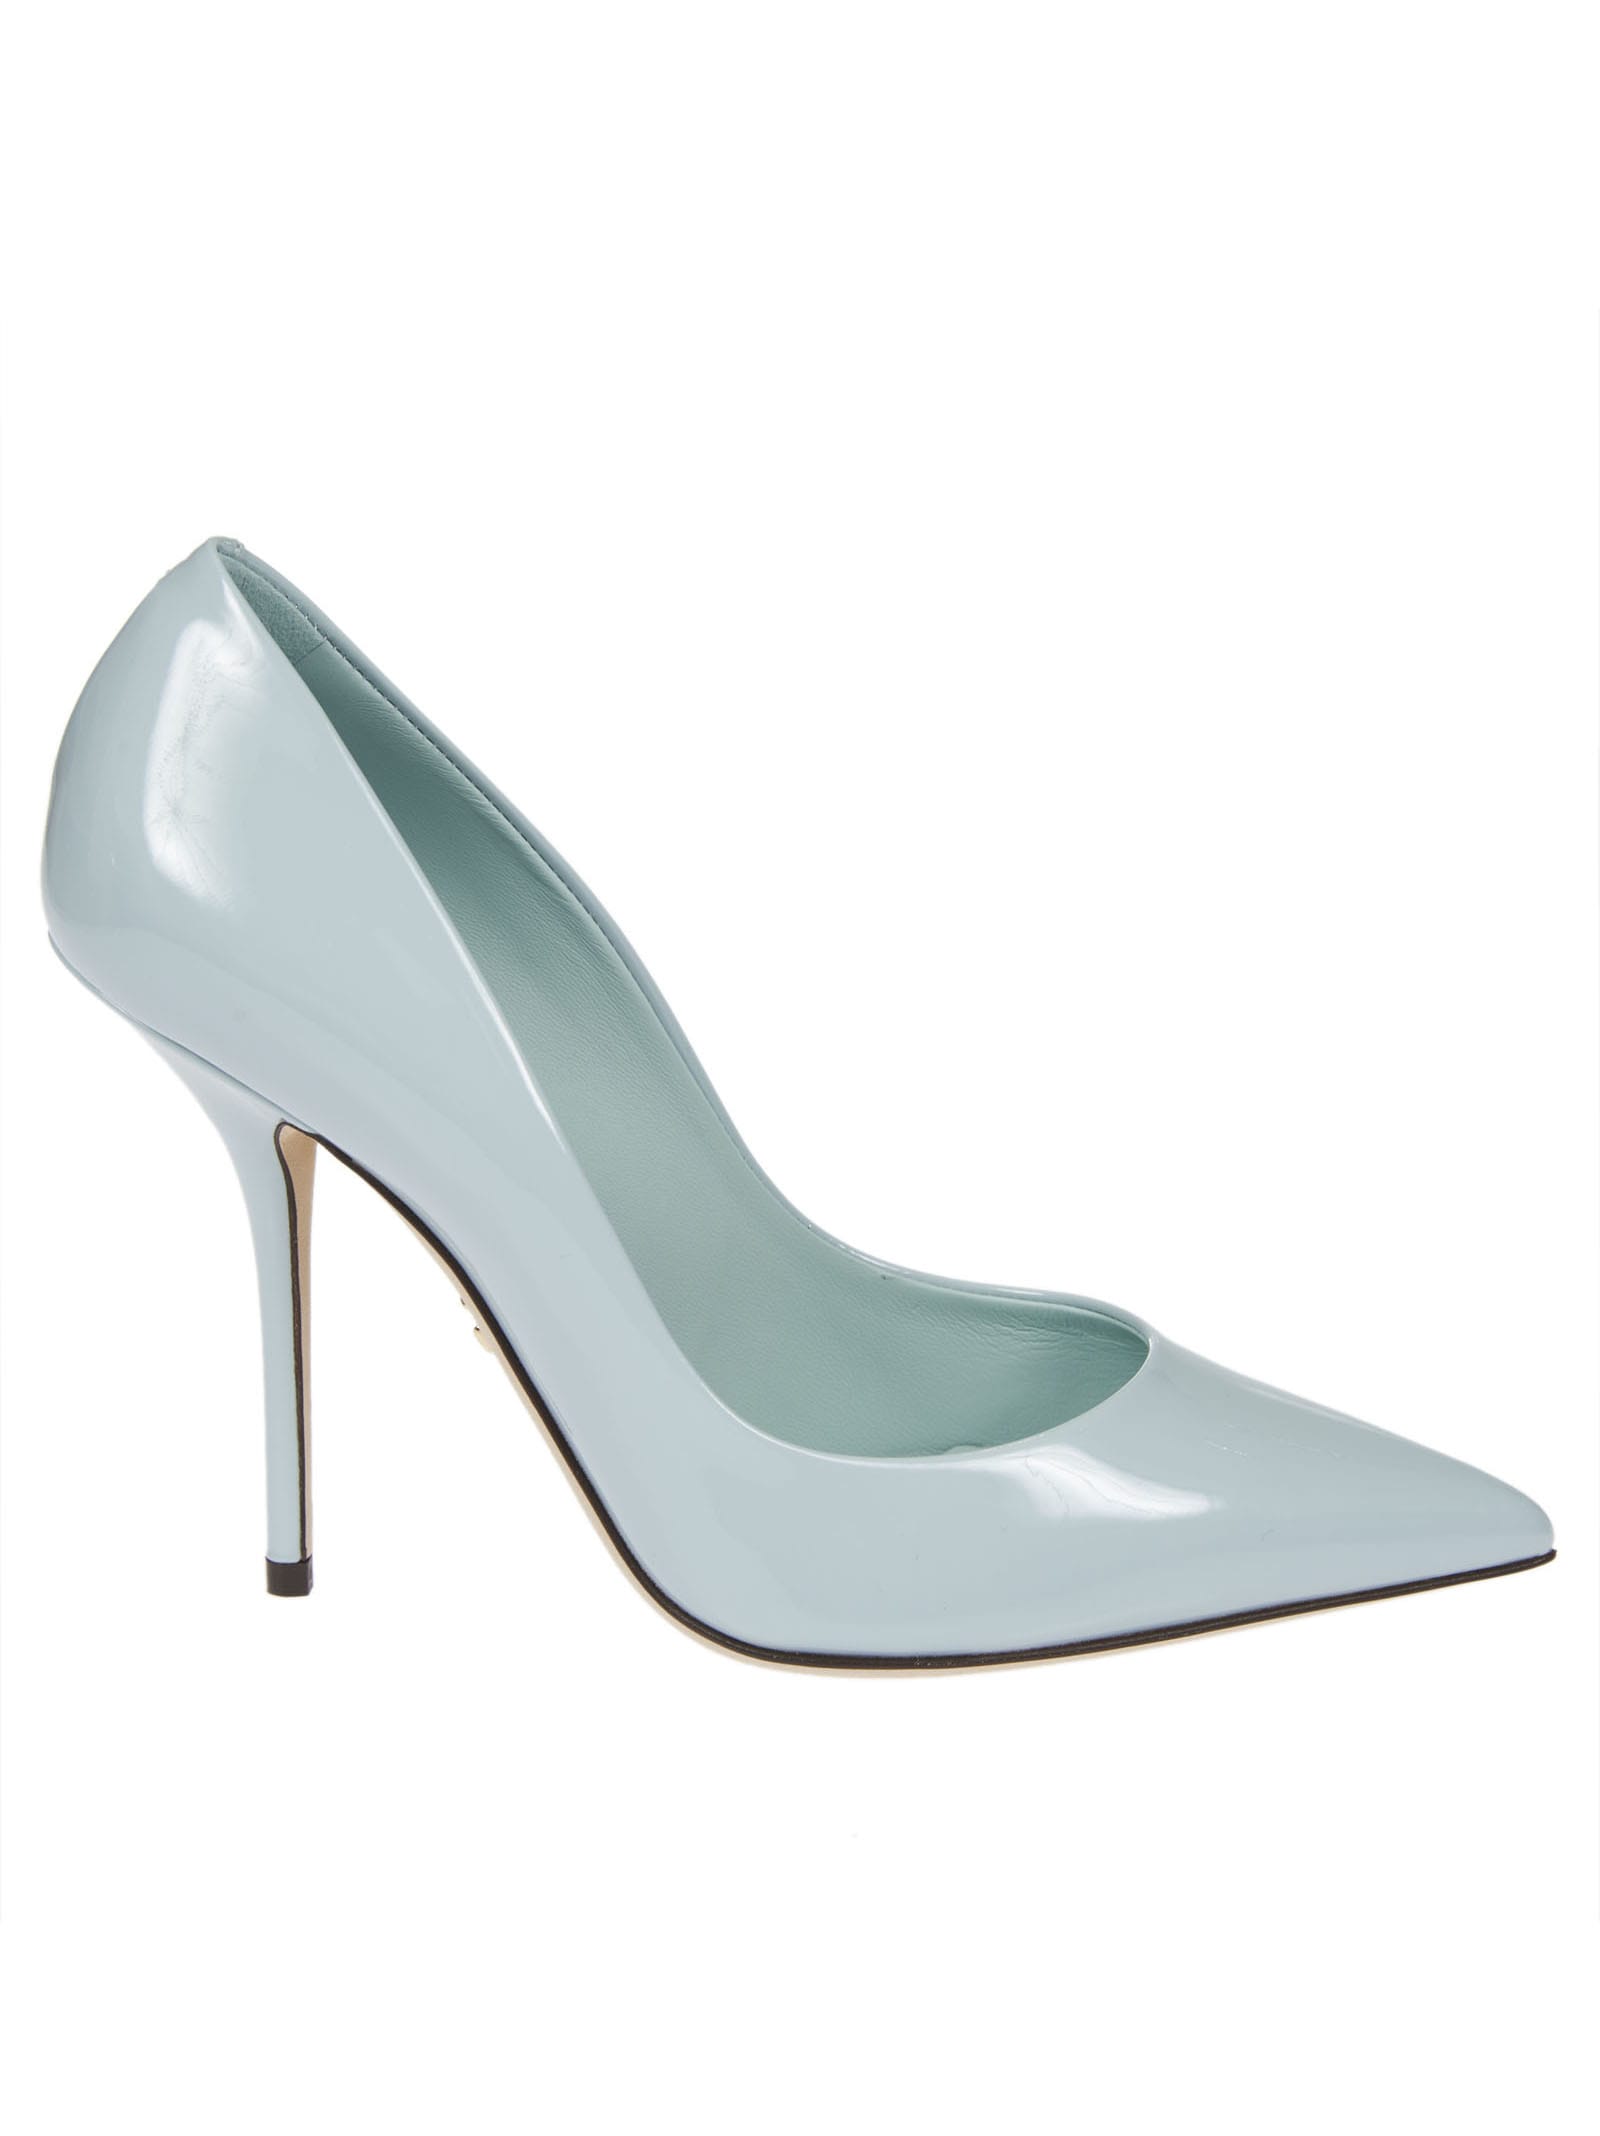 Dolce & Gabbana Classic Pointed Toe Pumps In Polvere